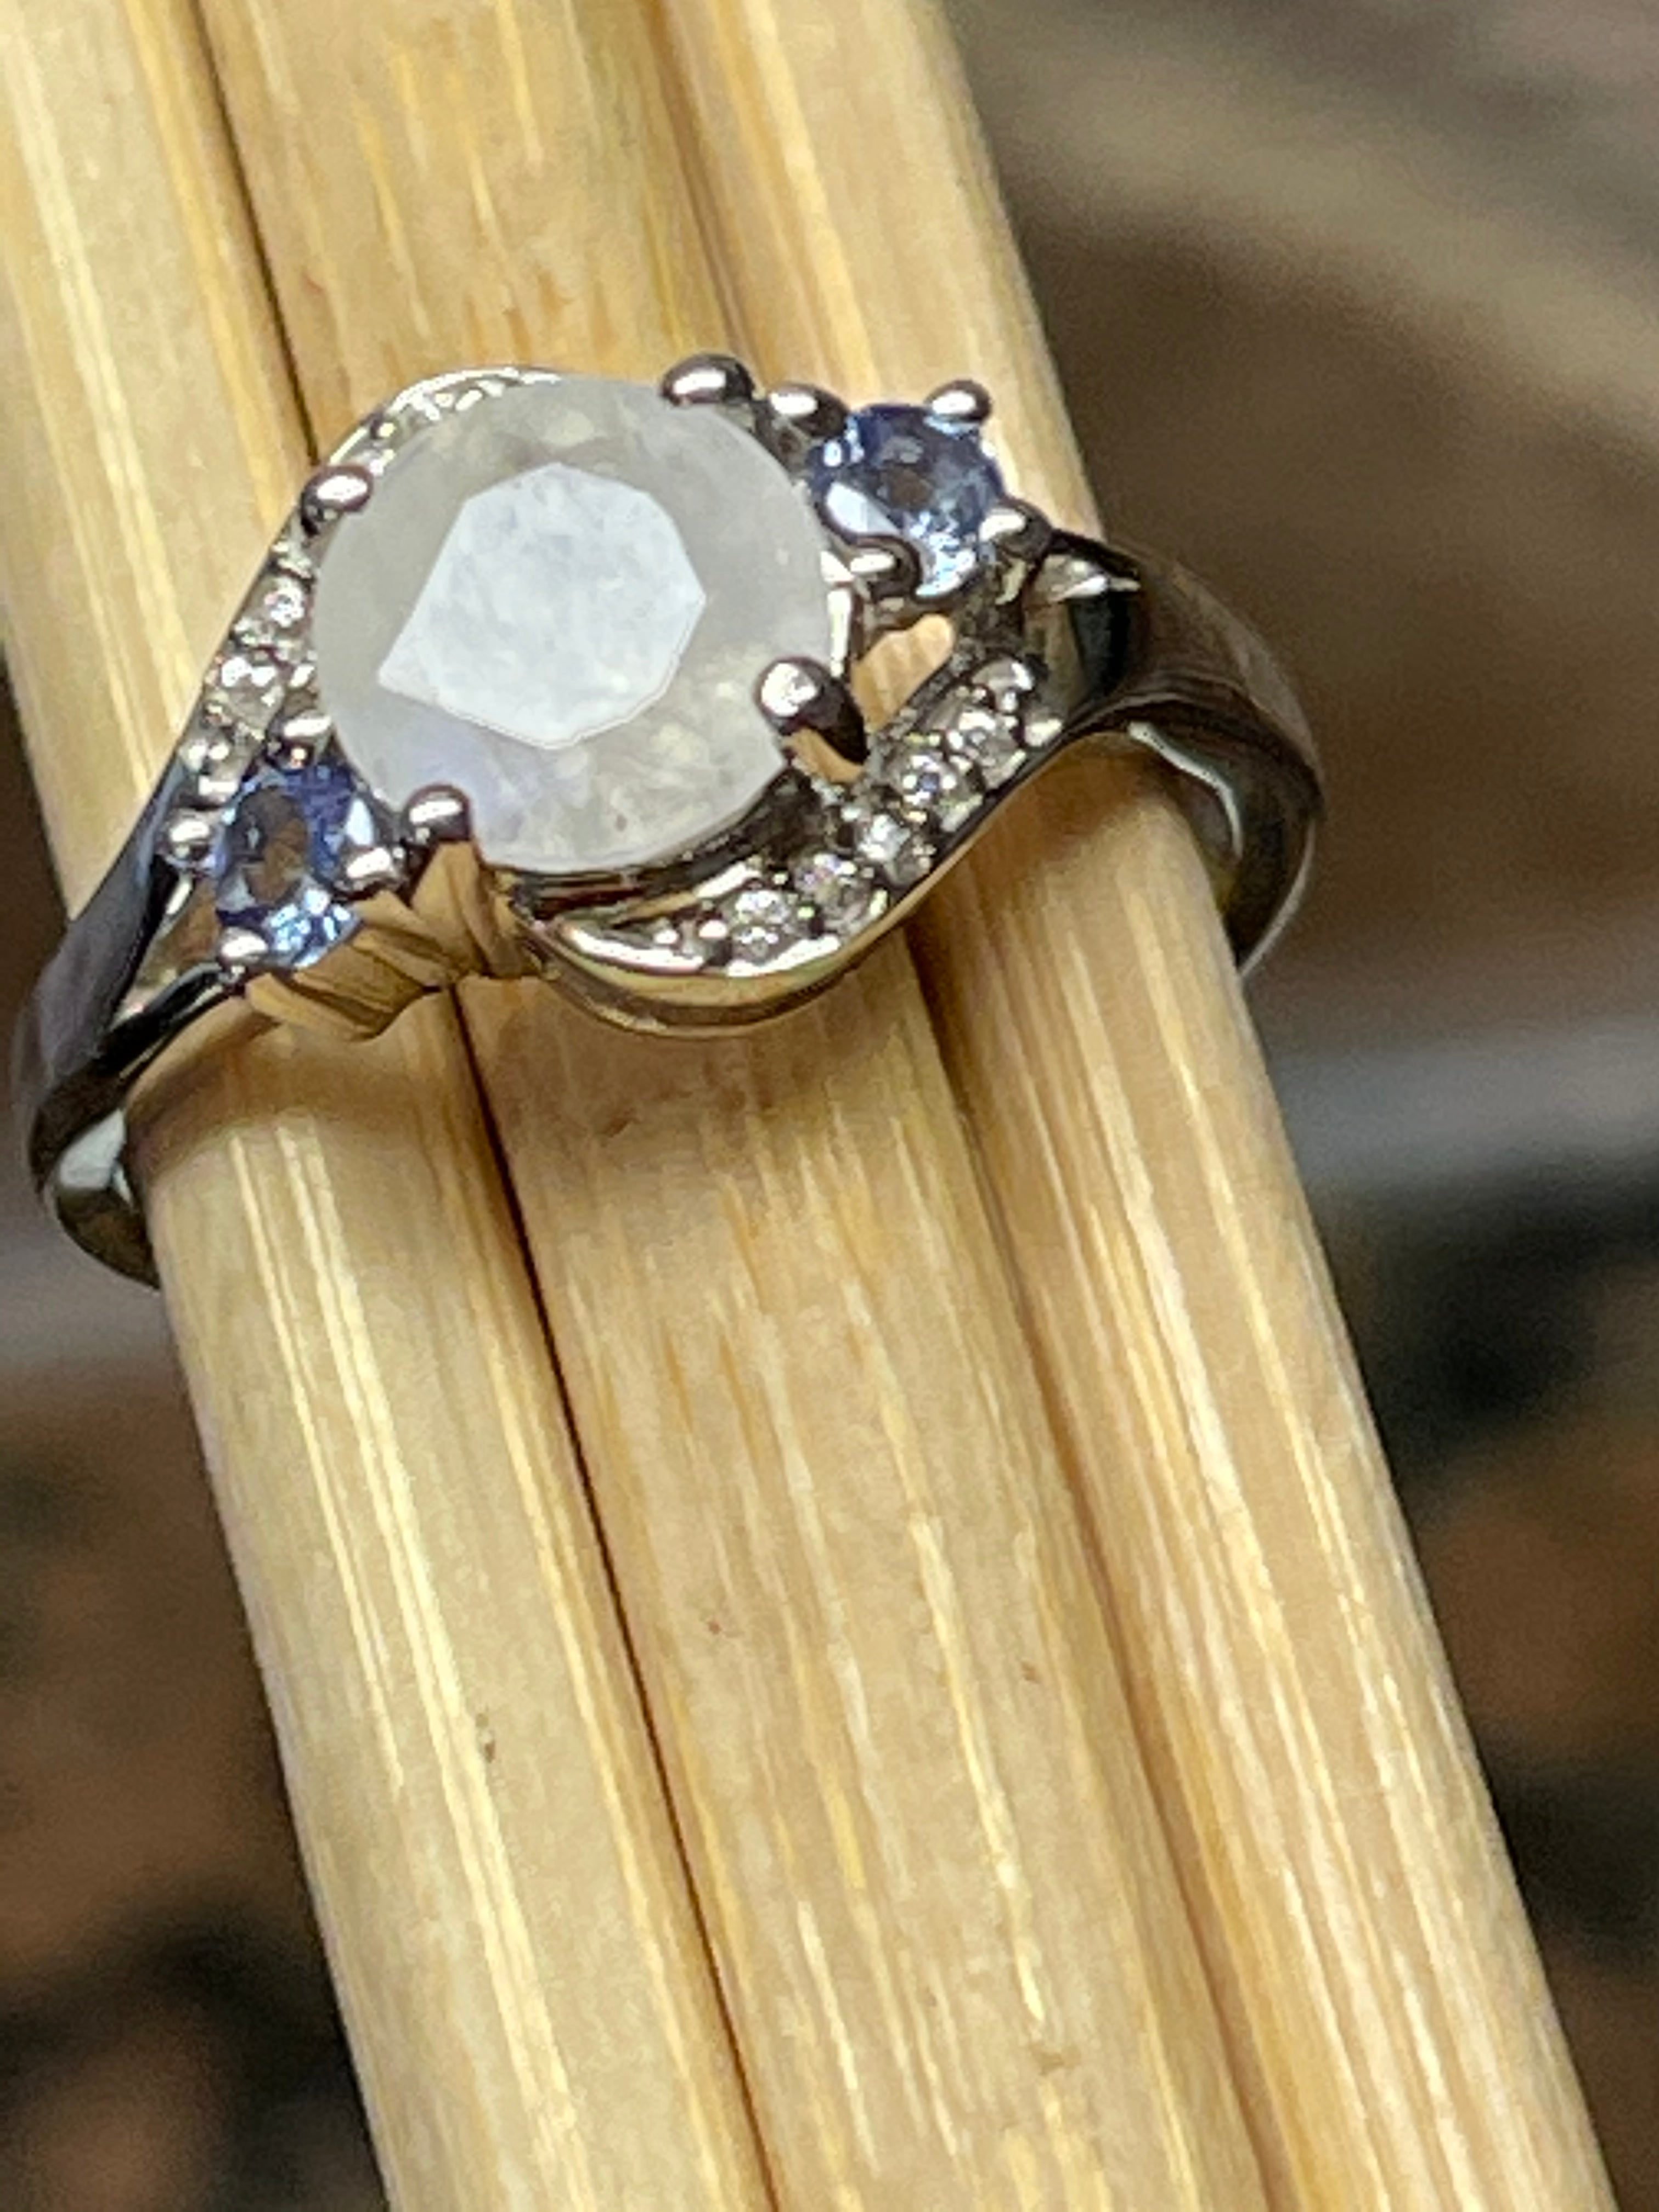 Genuine Rainbow Moonstone, Tanzanite 925 Solid Sterling Silver Engagement Ring Size 5, 6, 7, 8, 9 - Natural Rocks by Kala